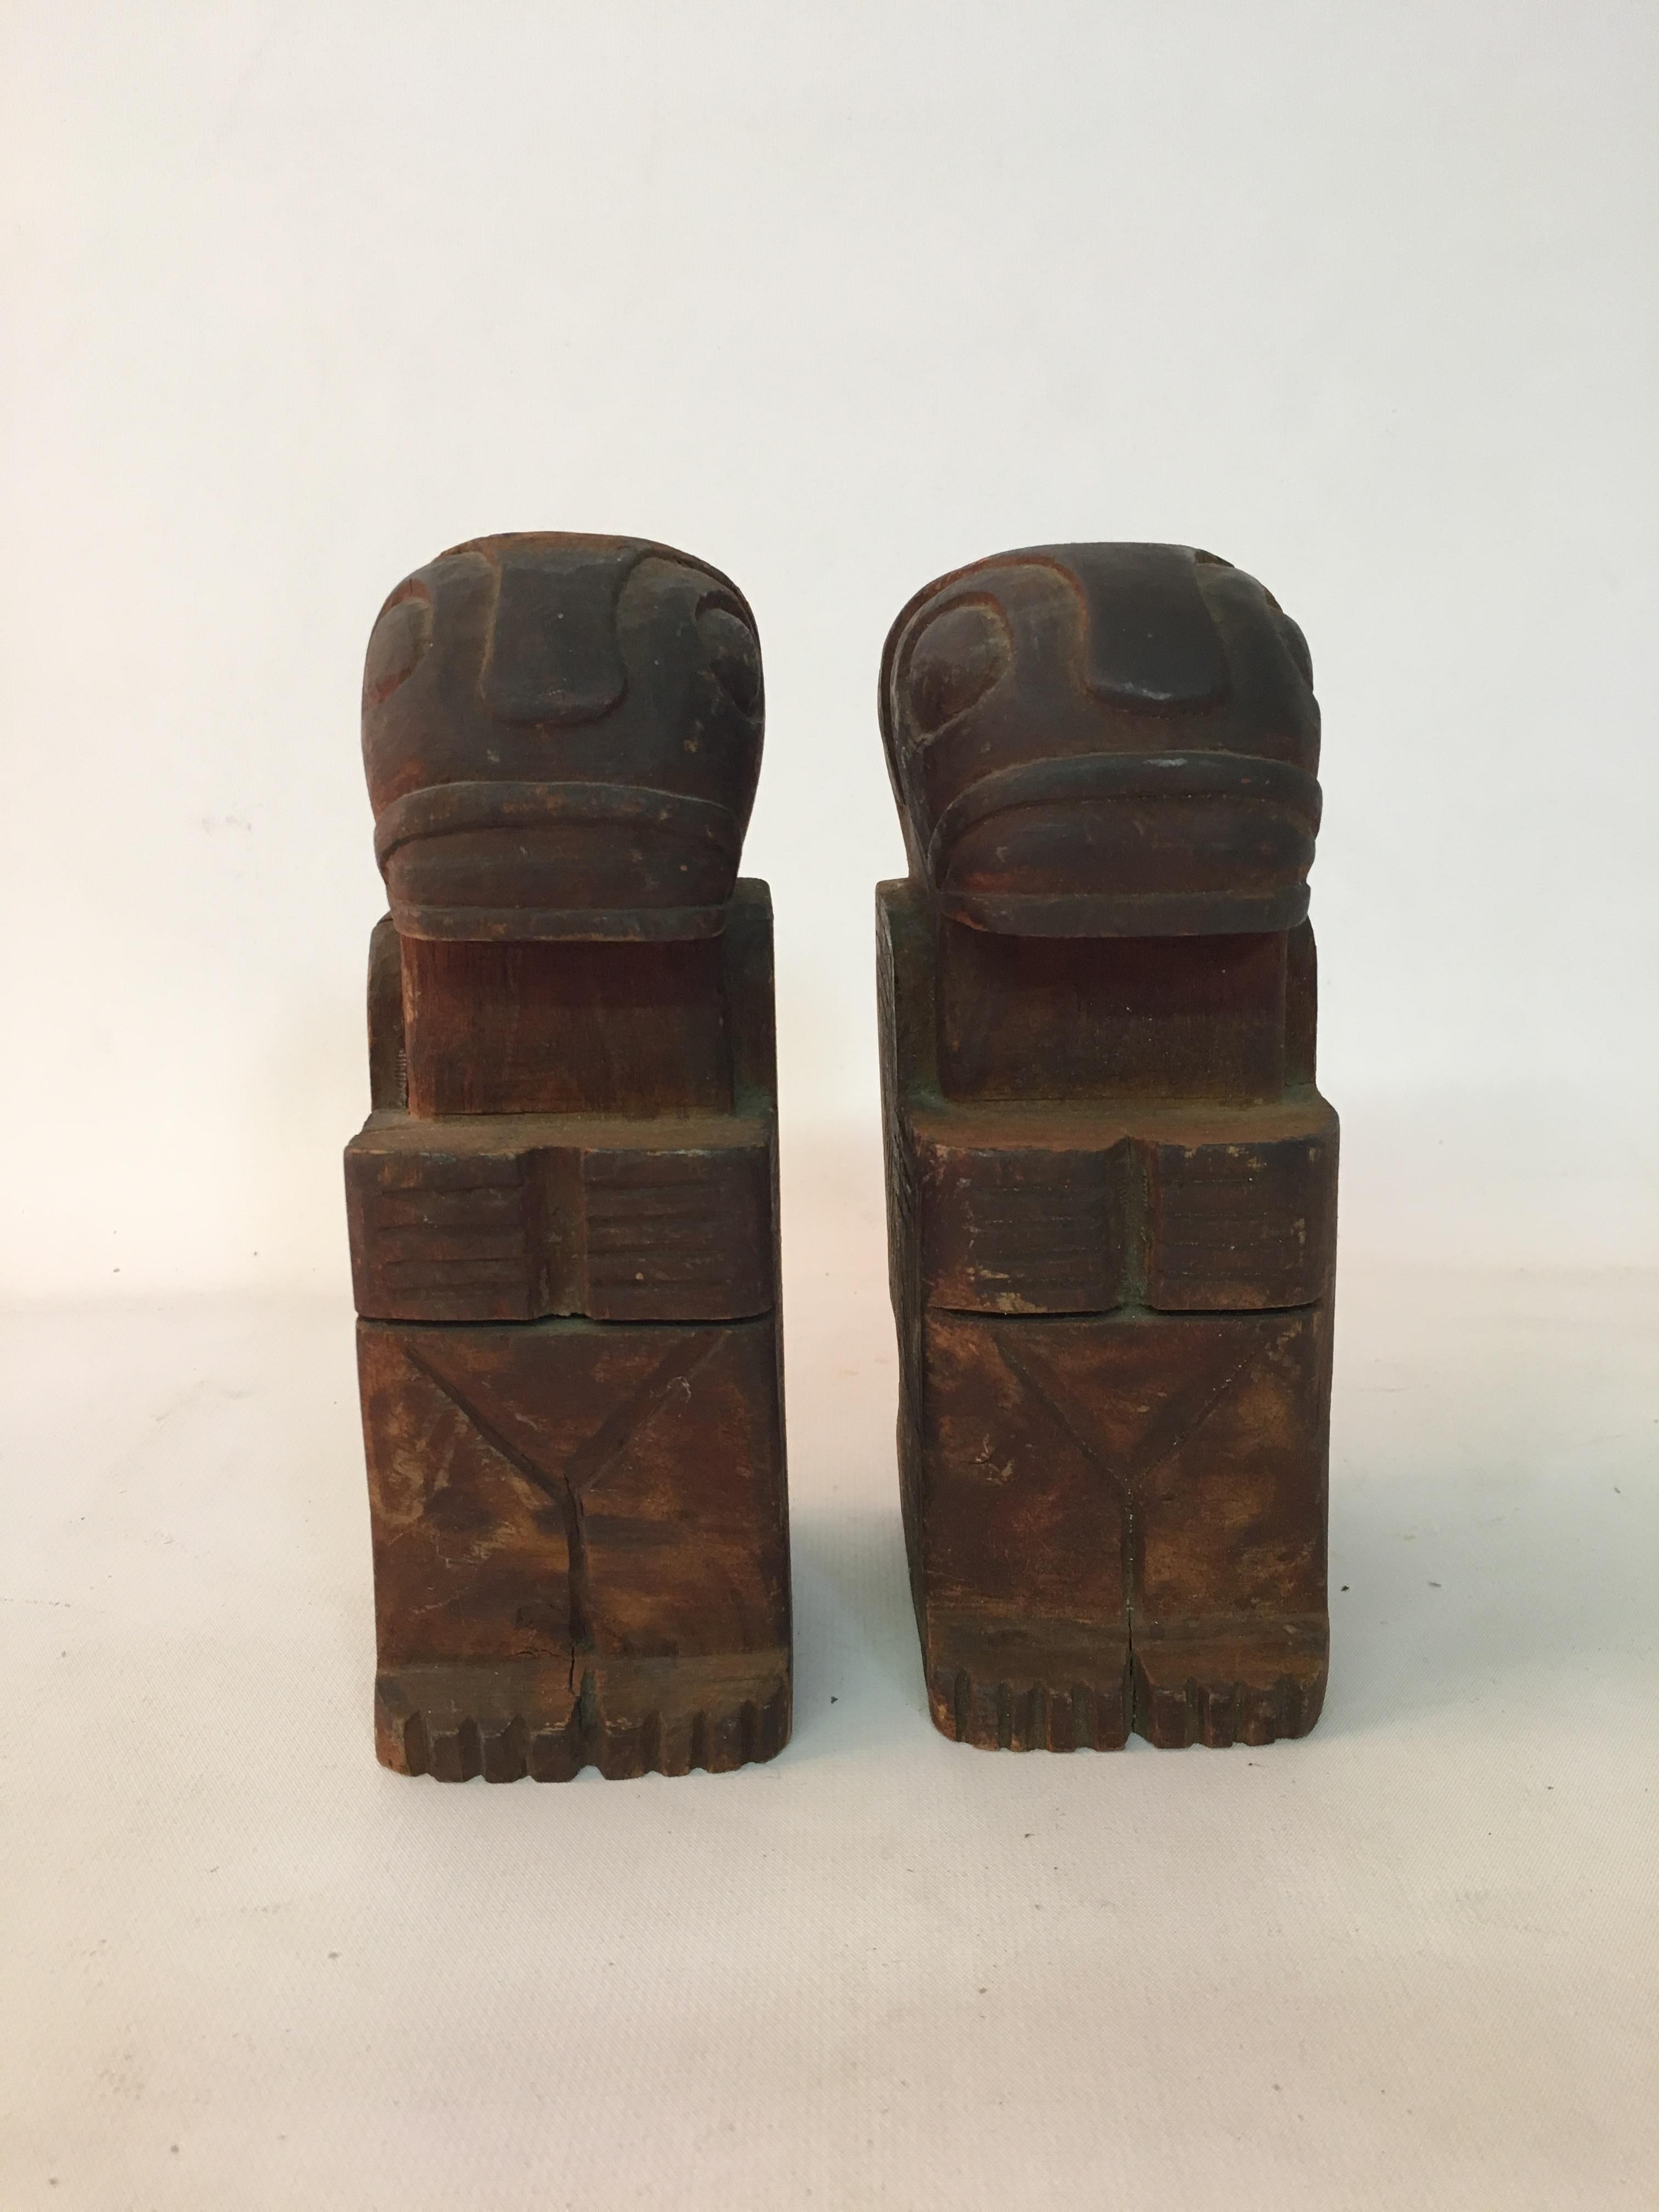 Wonderful patina and age from The Marquesas Islands (French Polynesia). Stylized and intricate detailed carving. Wear and splits to both carved figures. Structurally sound, circa early 20th century.
 